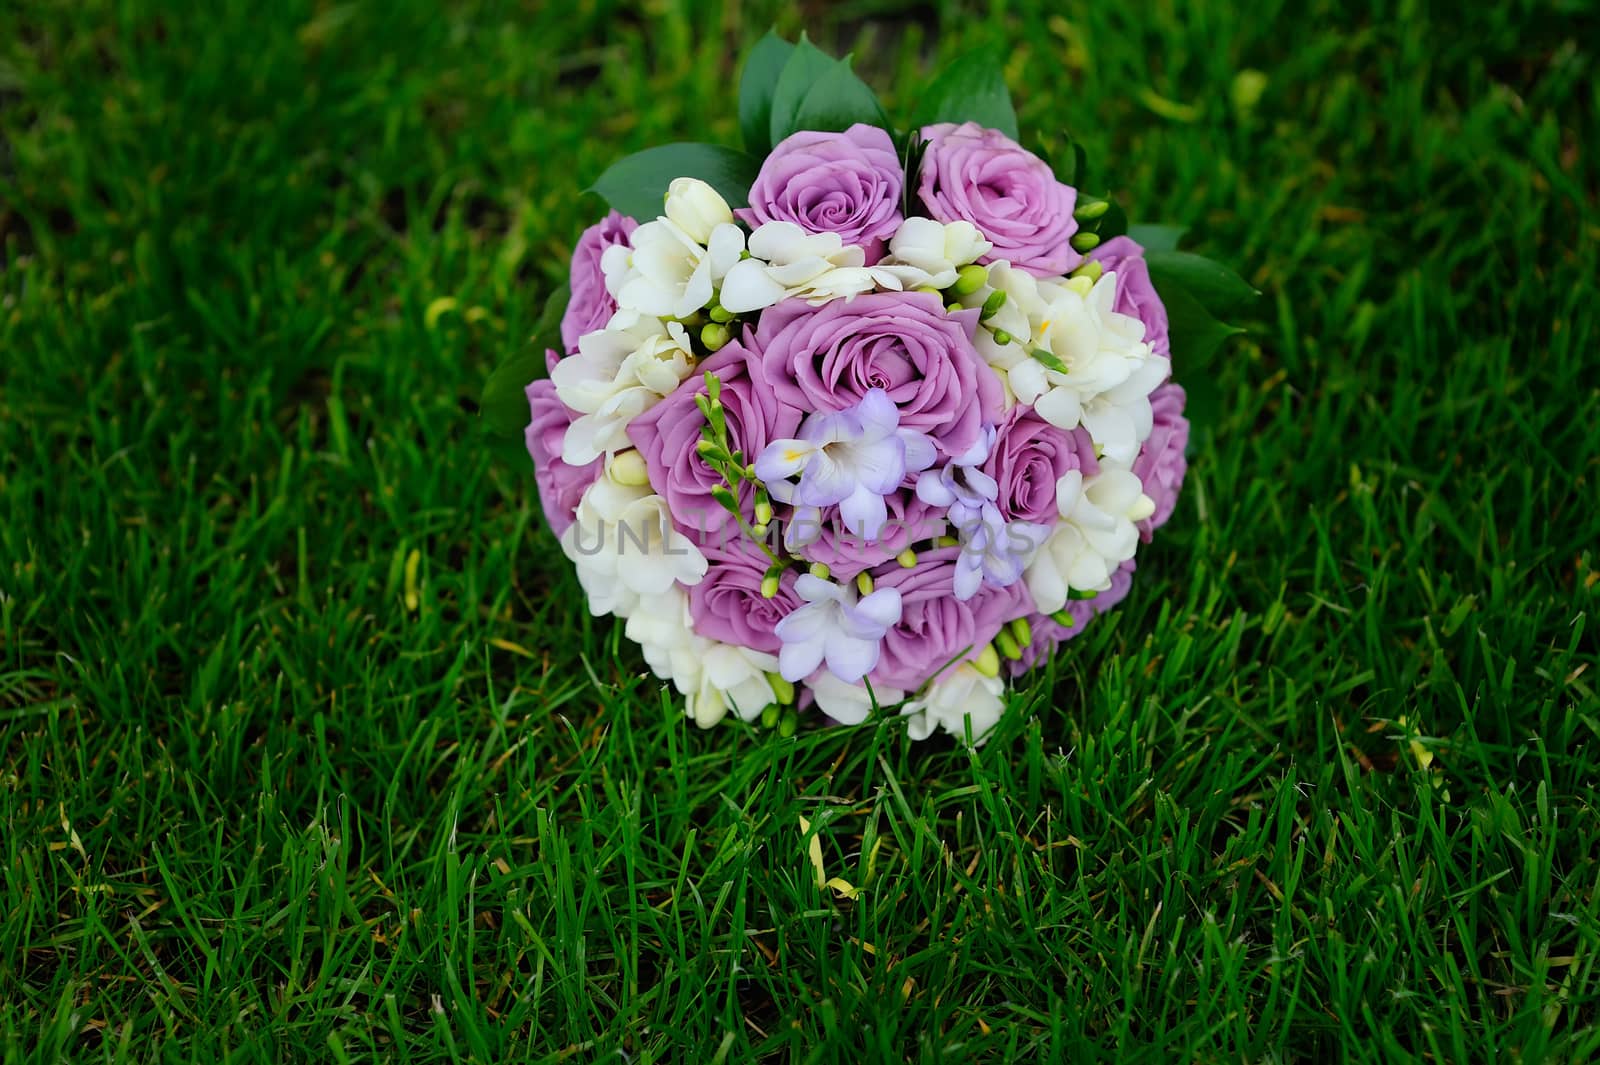 pink and white wedding bouquet on grass